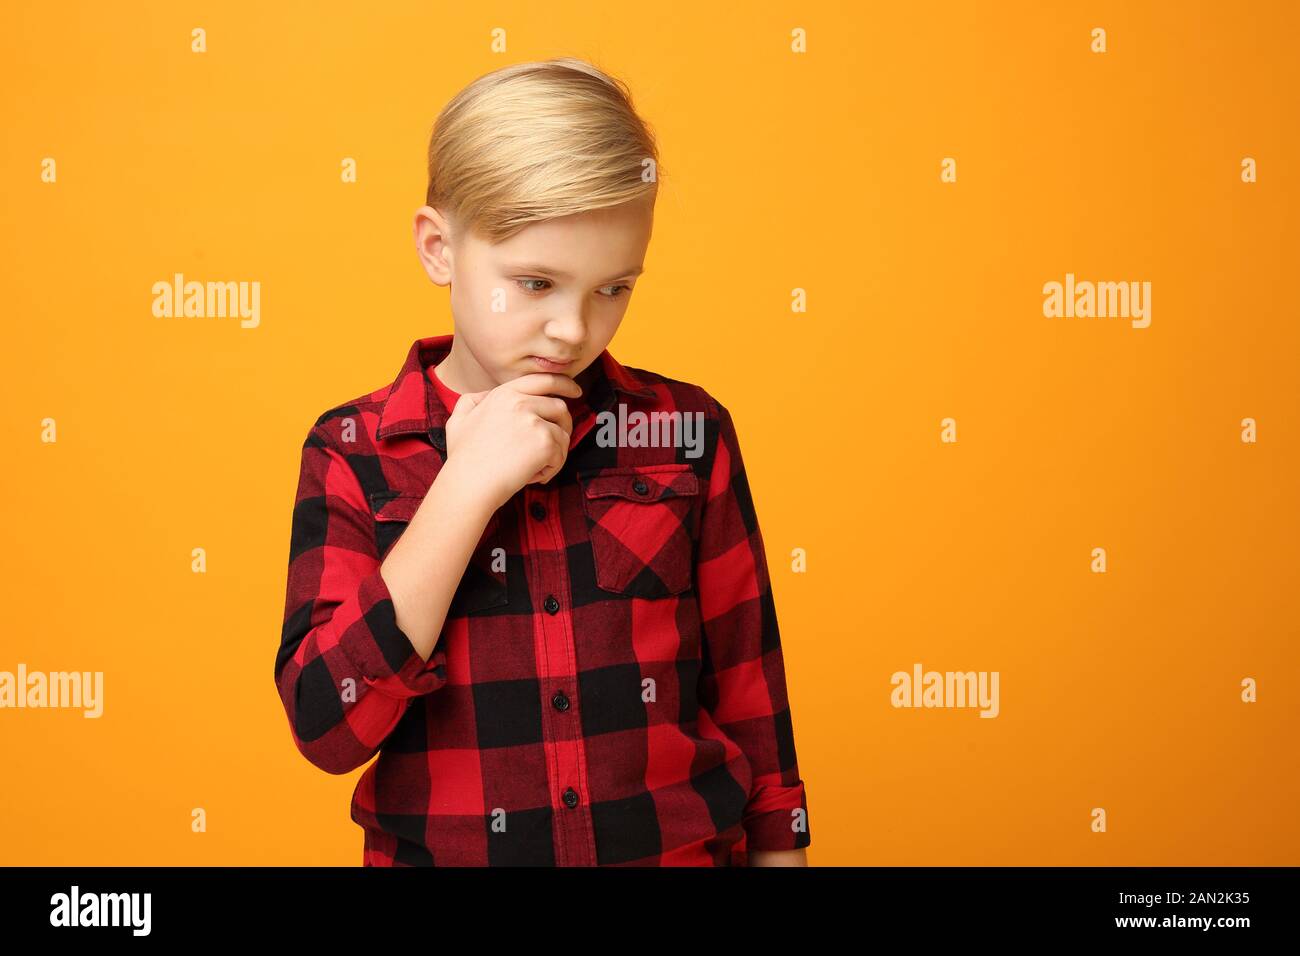 Pensive focused young boy, child emotions. Young handsome smiling caucasian boy in the red shirt on the yellow background. Horizontal, straight on. Stock Photo